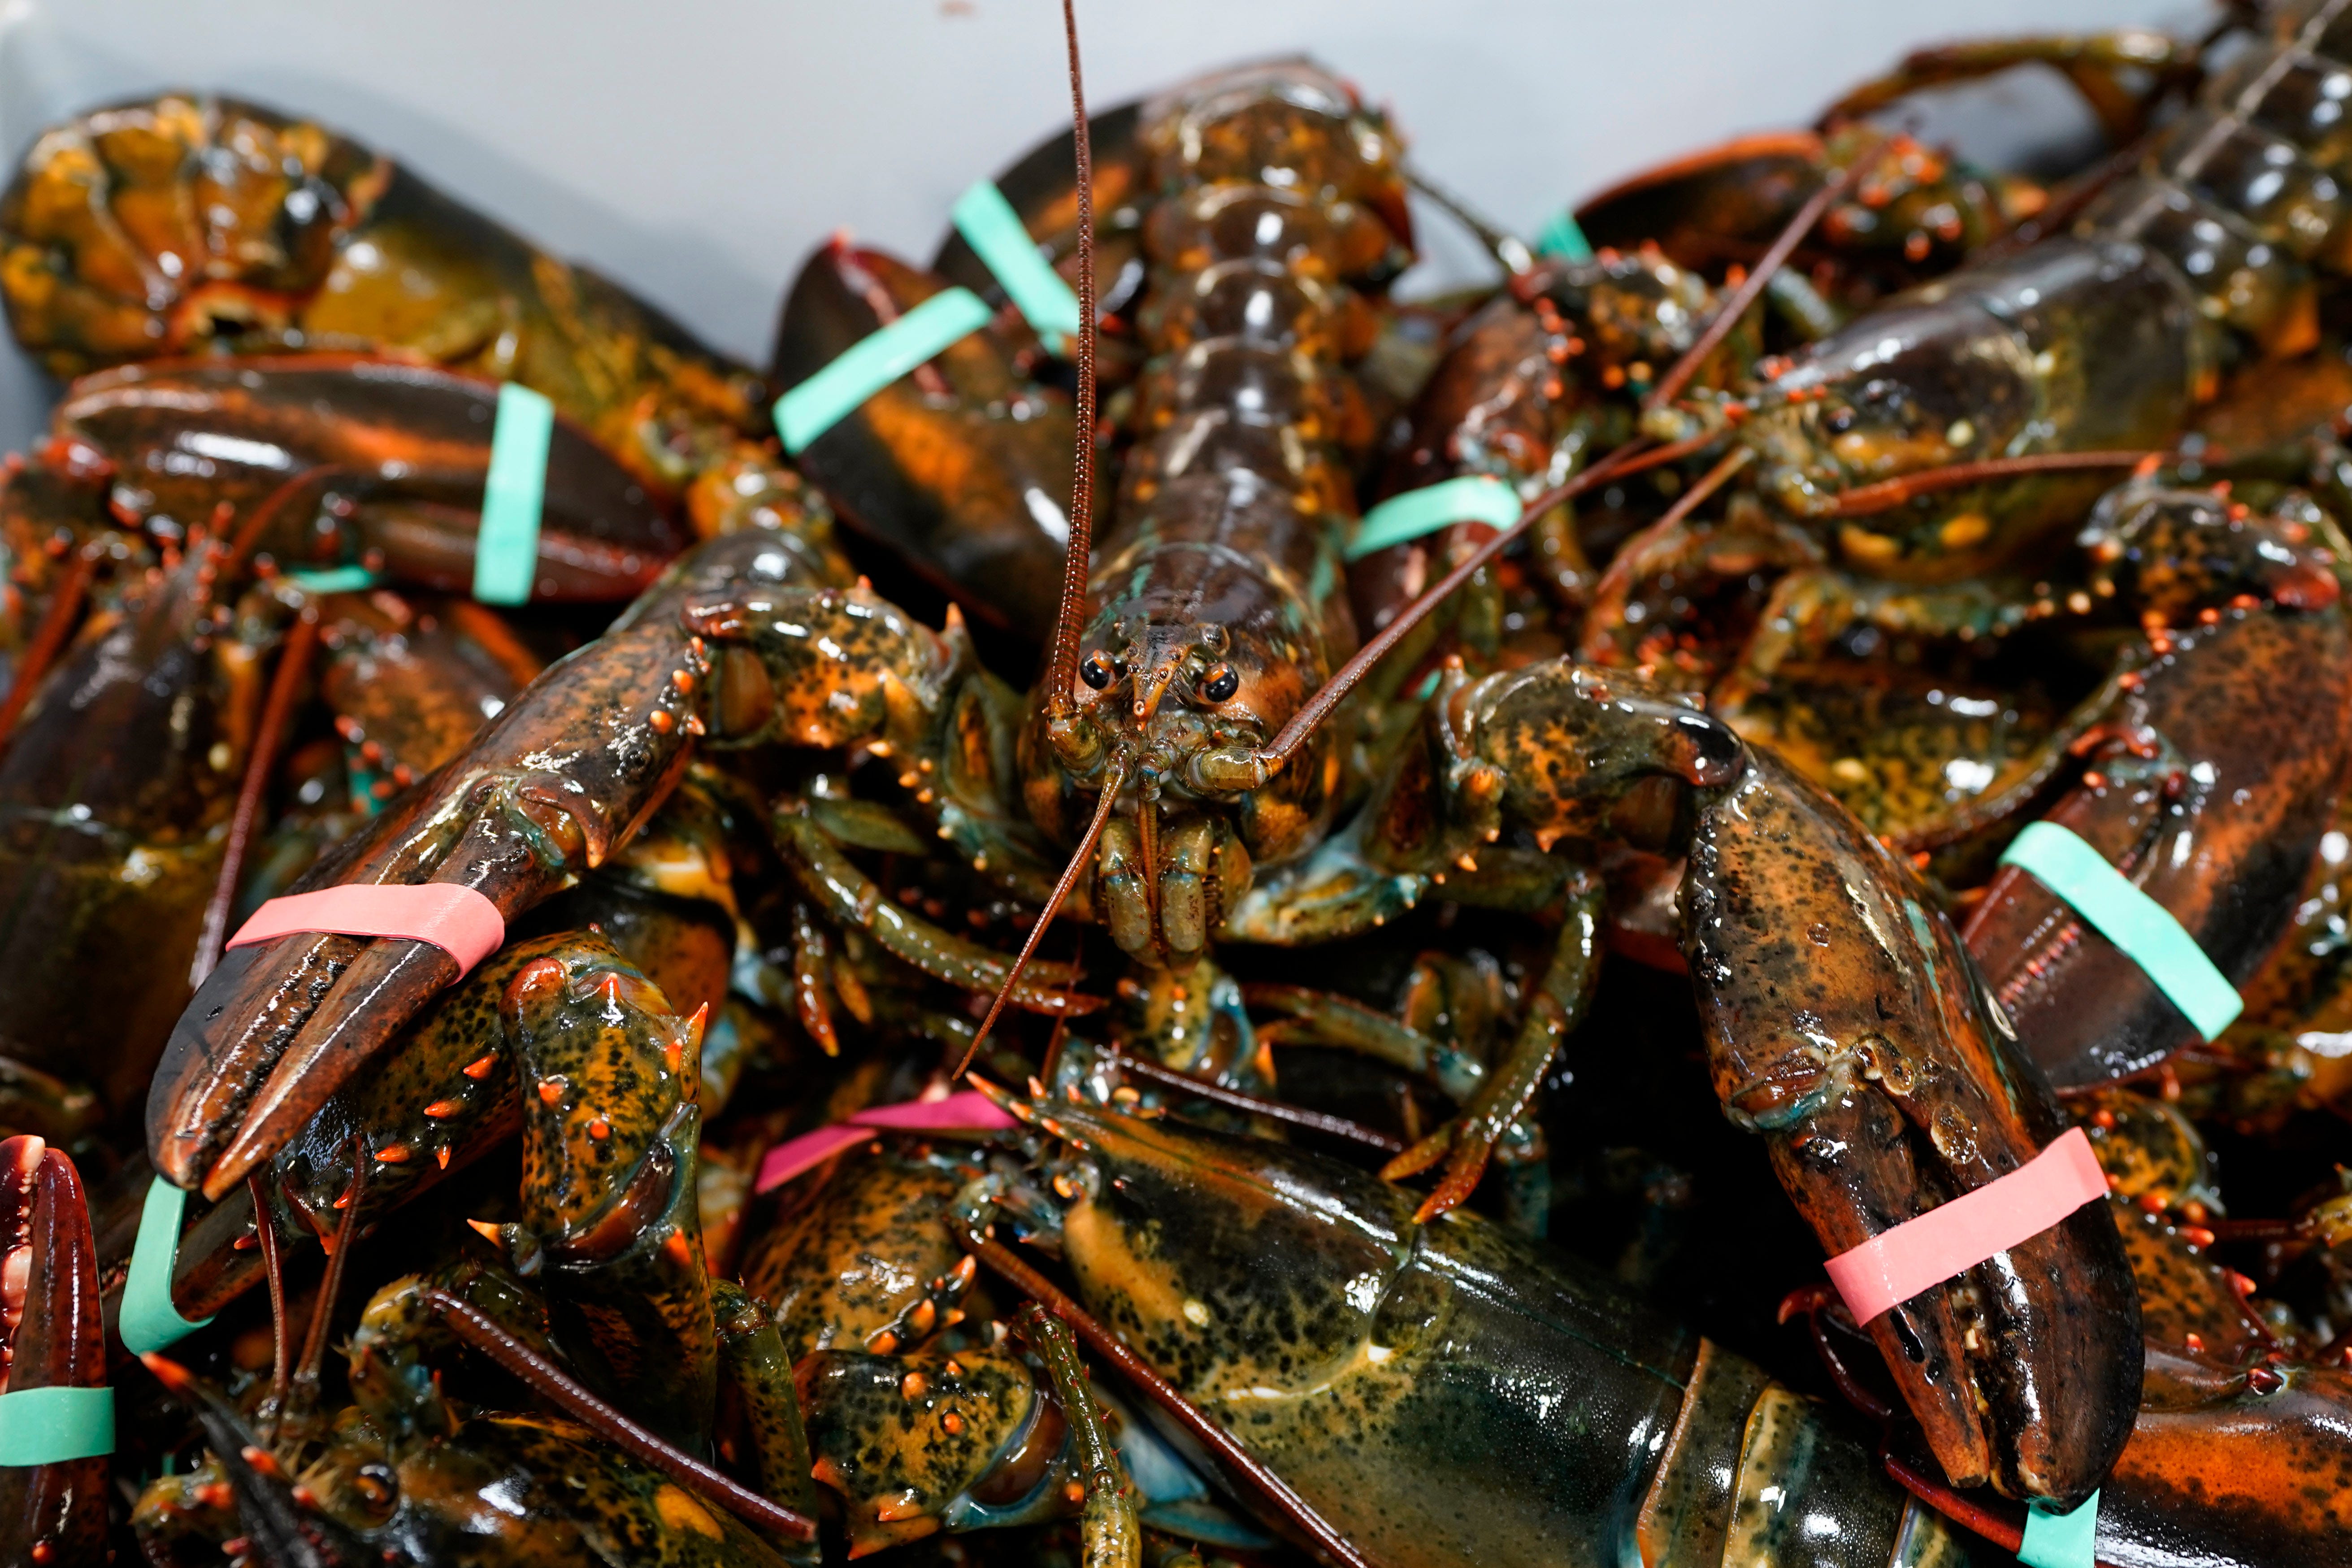 Maine lobster industry sues California aquarium for 'red list' that led to boycott